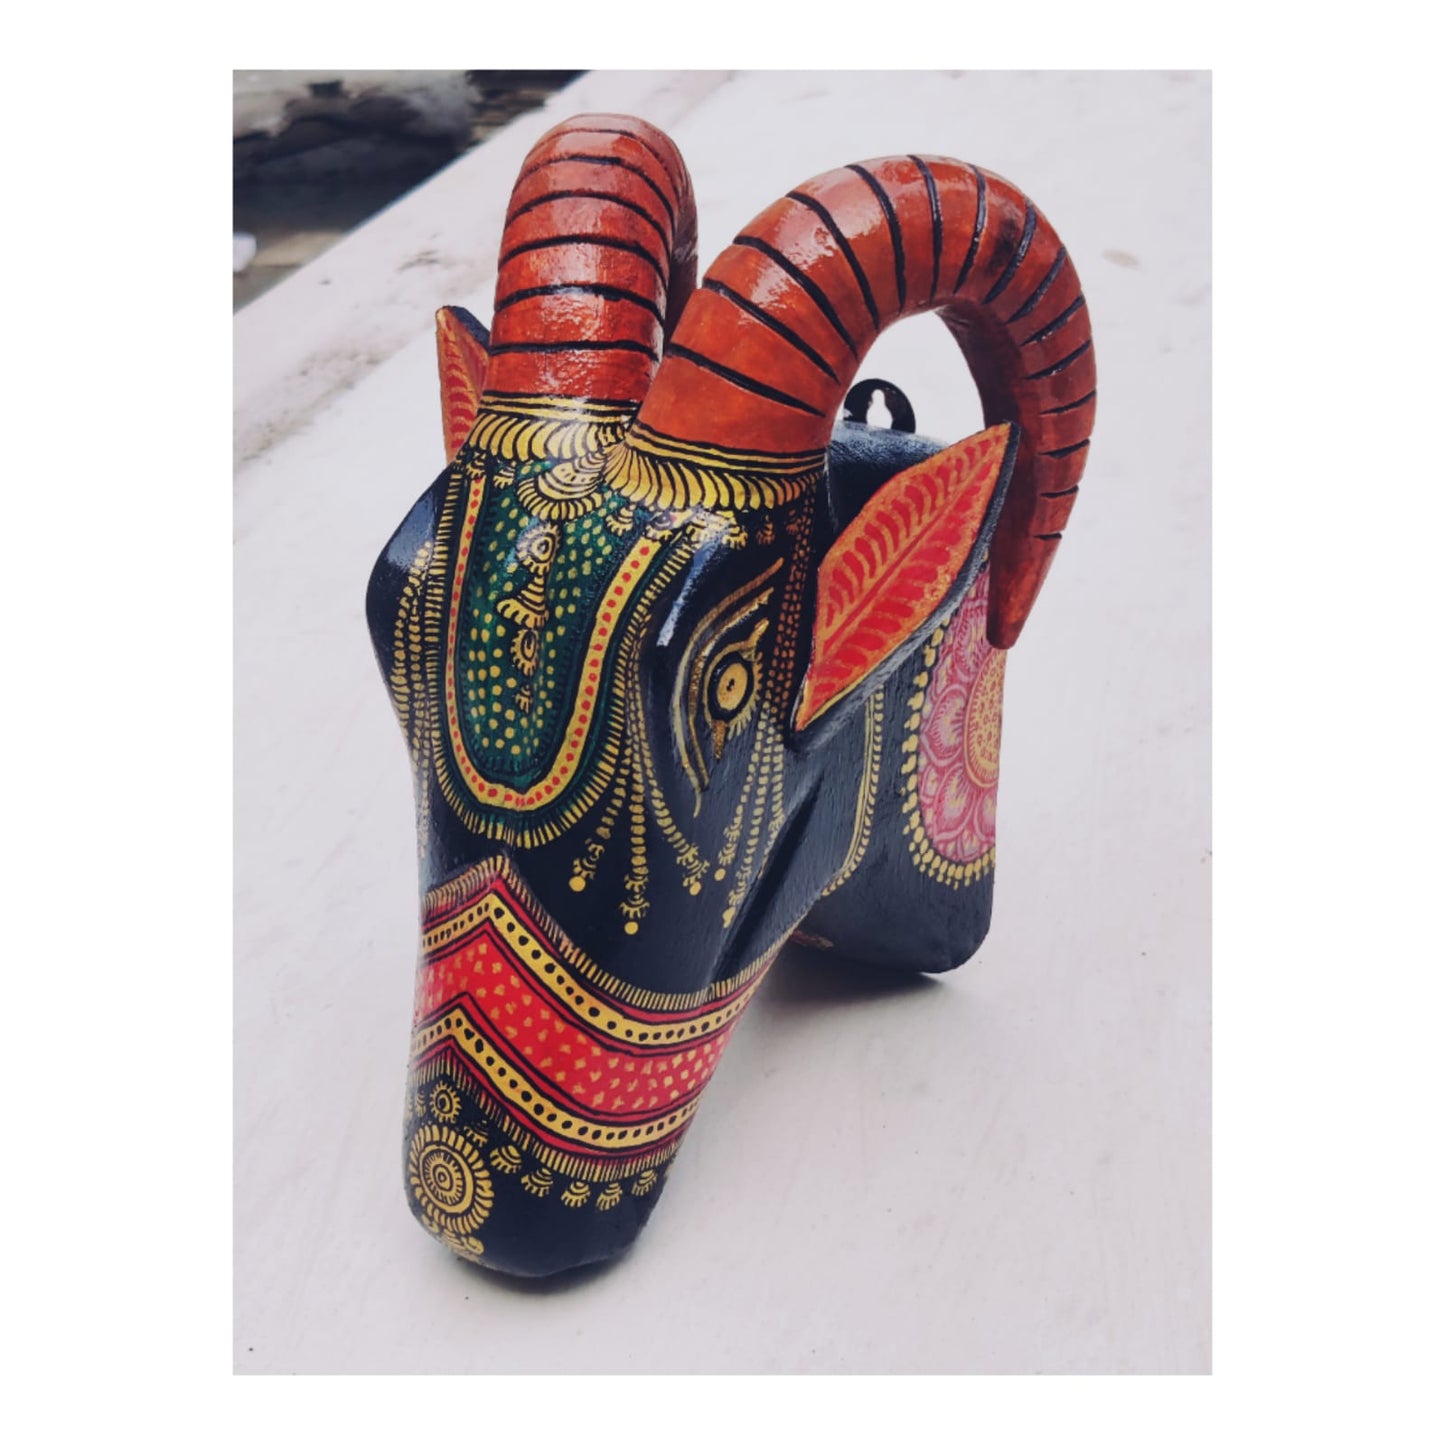 Decorated Hand painted Pattachitra Black Wooden Ram Head